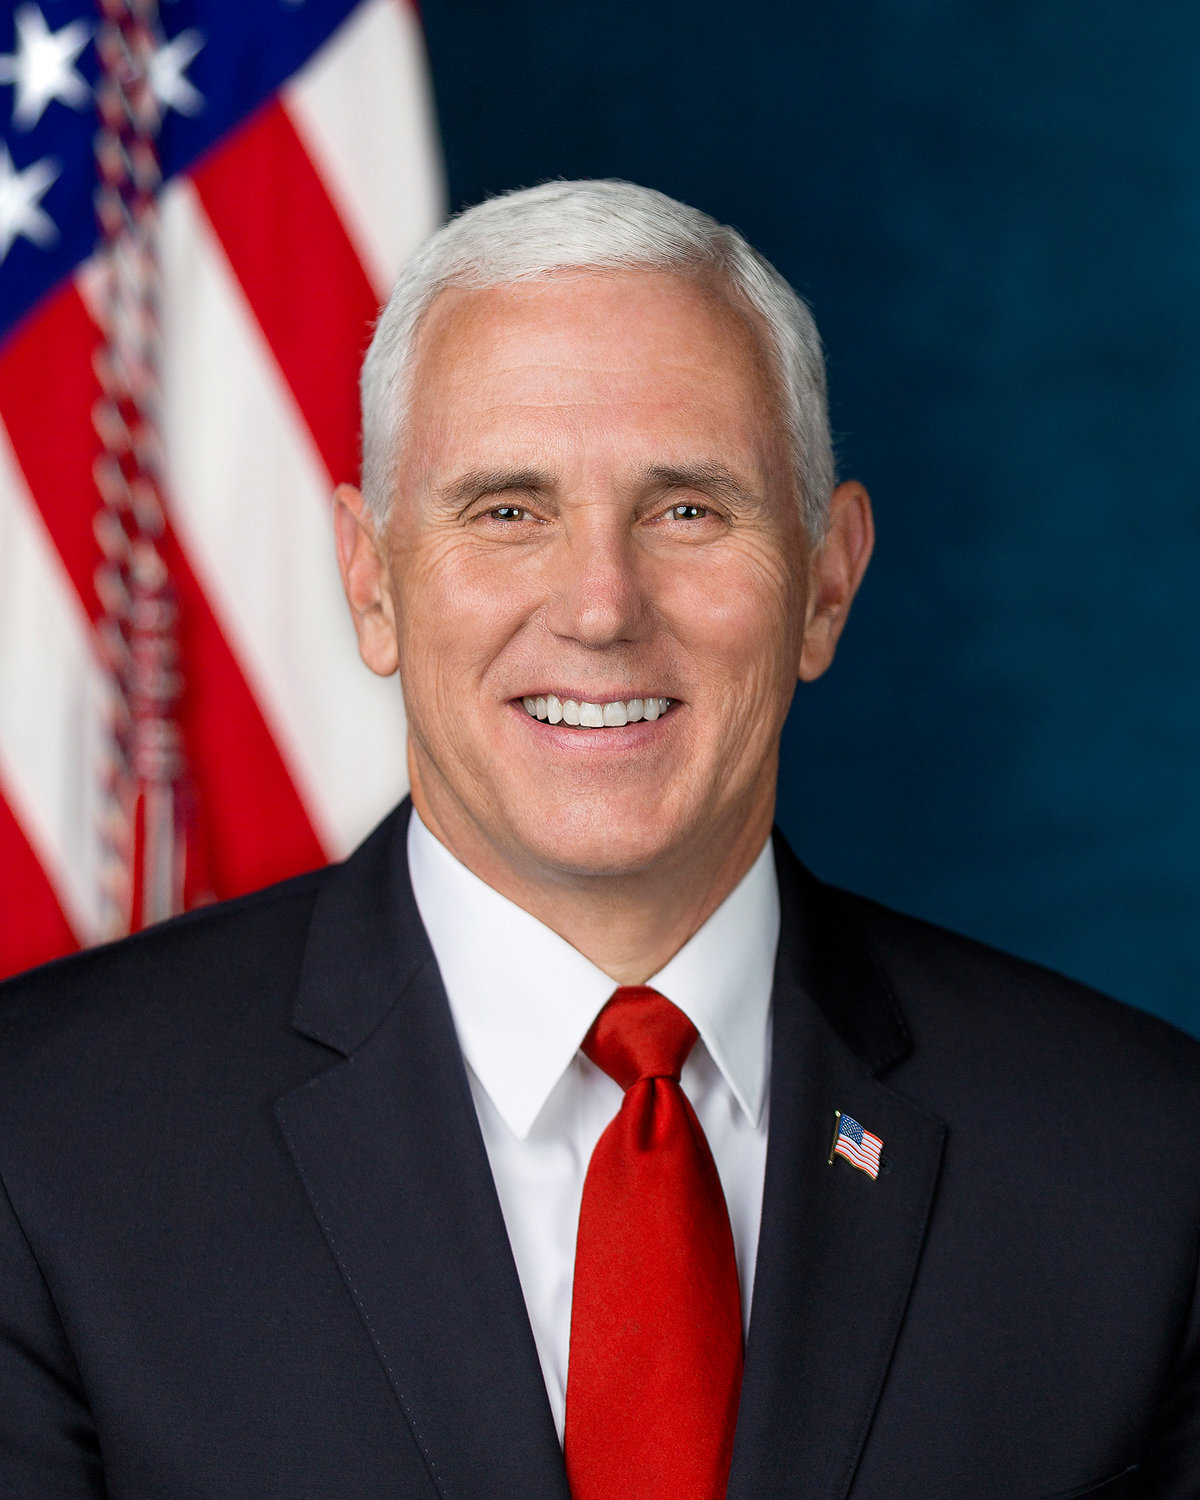 Former Vice President Mike Pence is among the speakers.